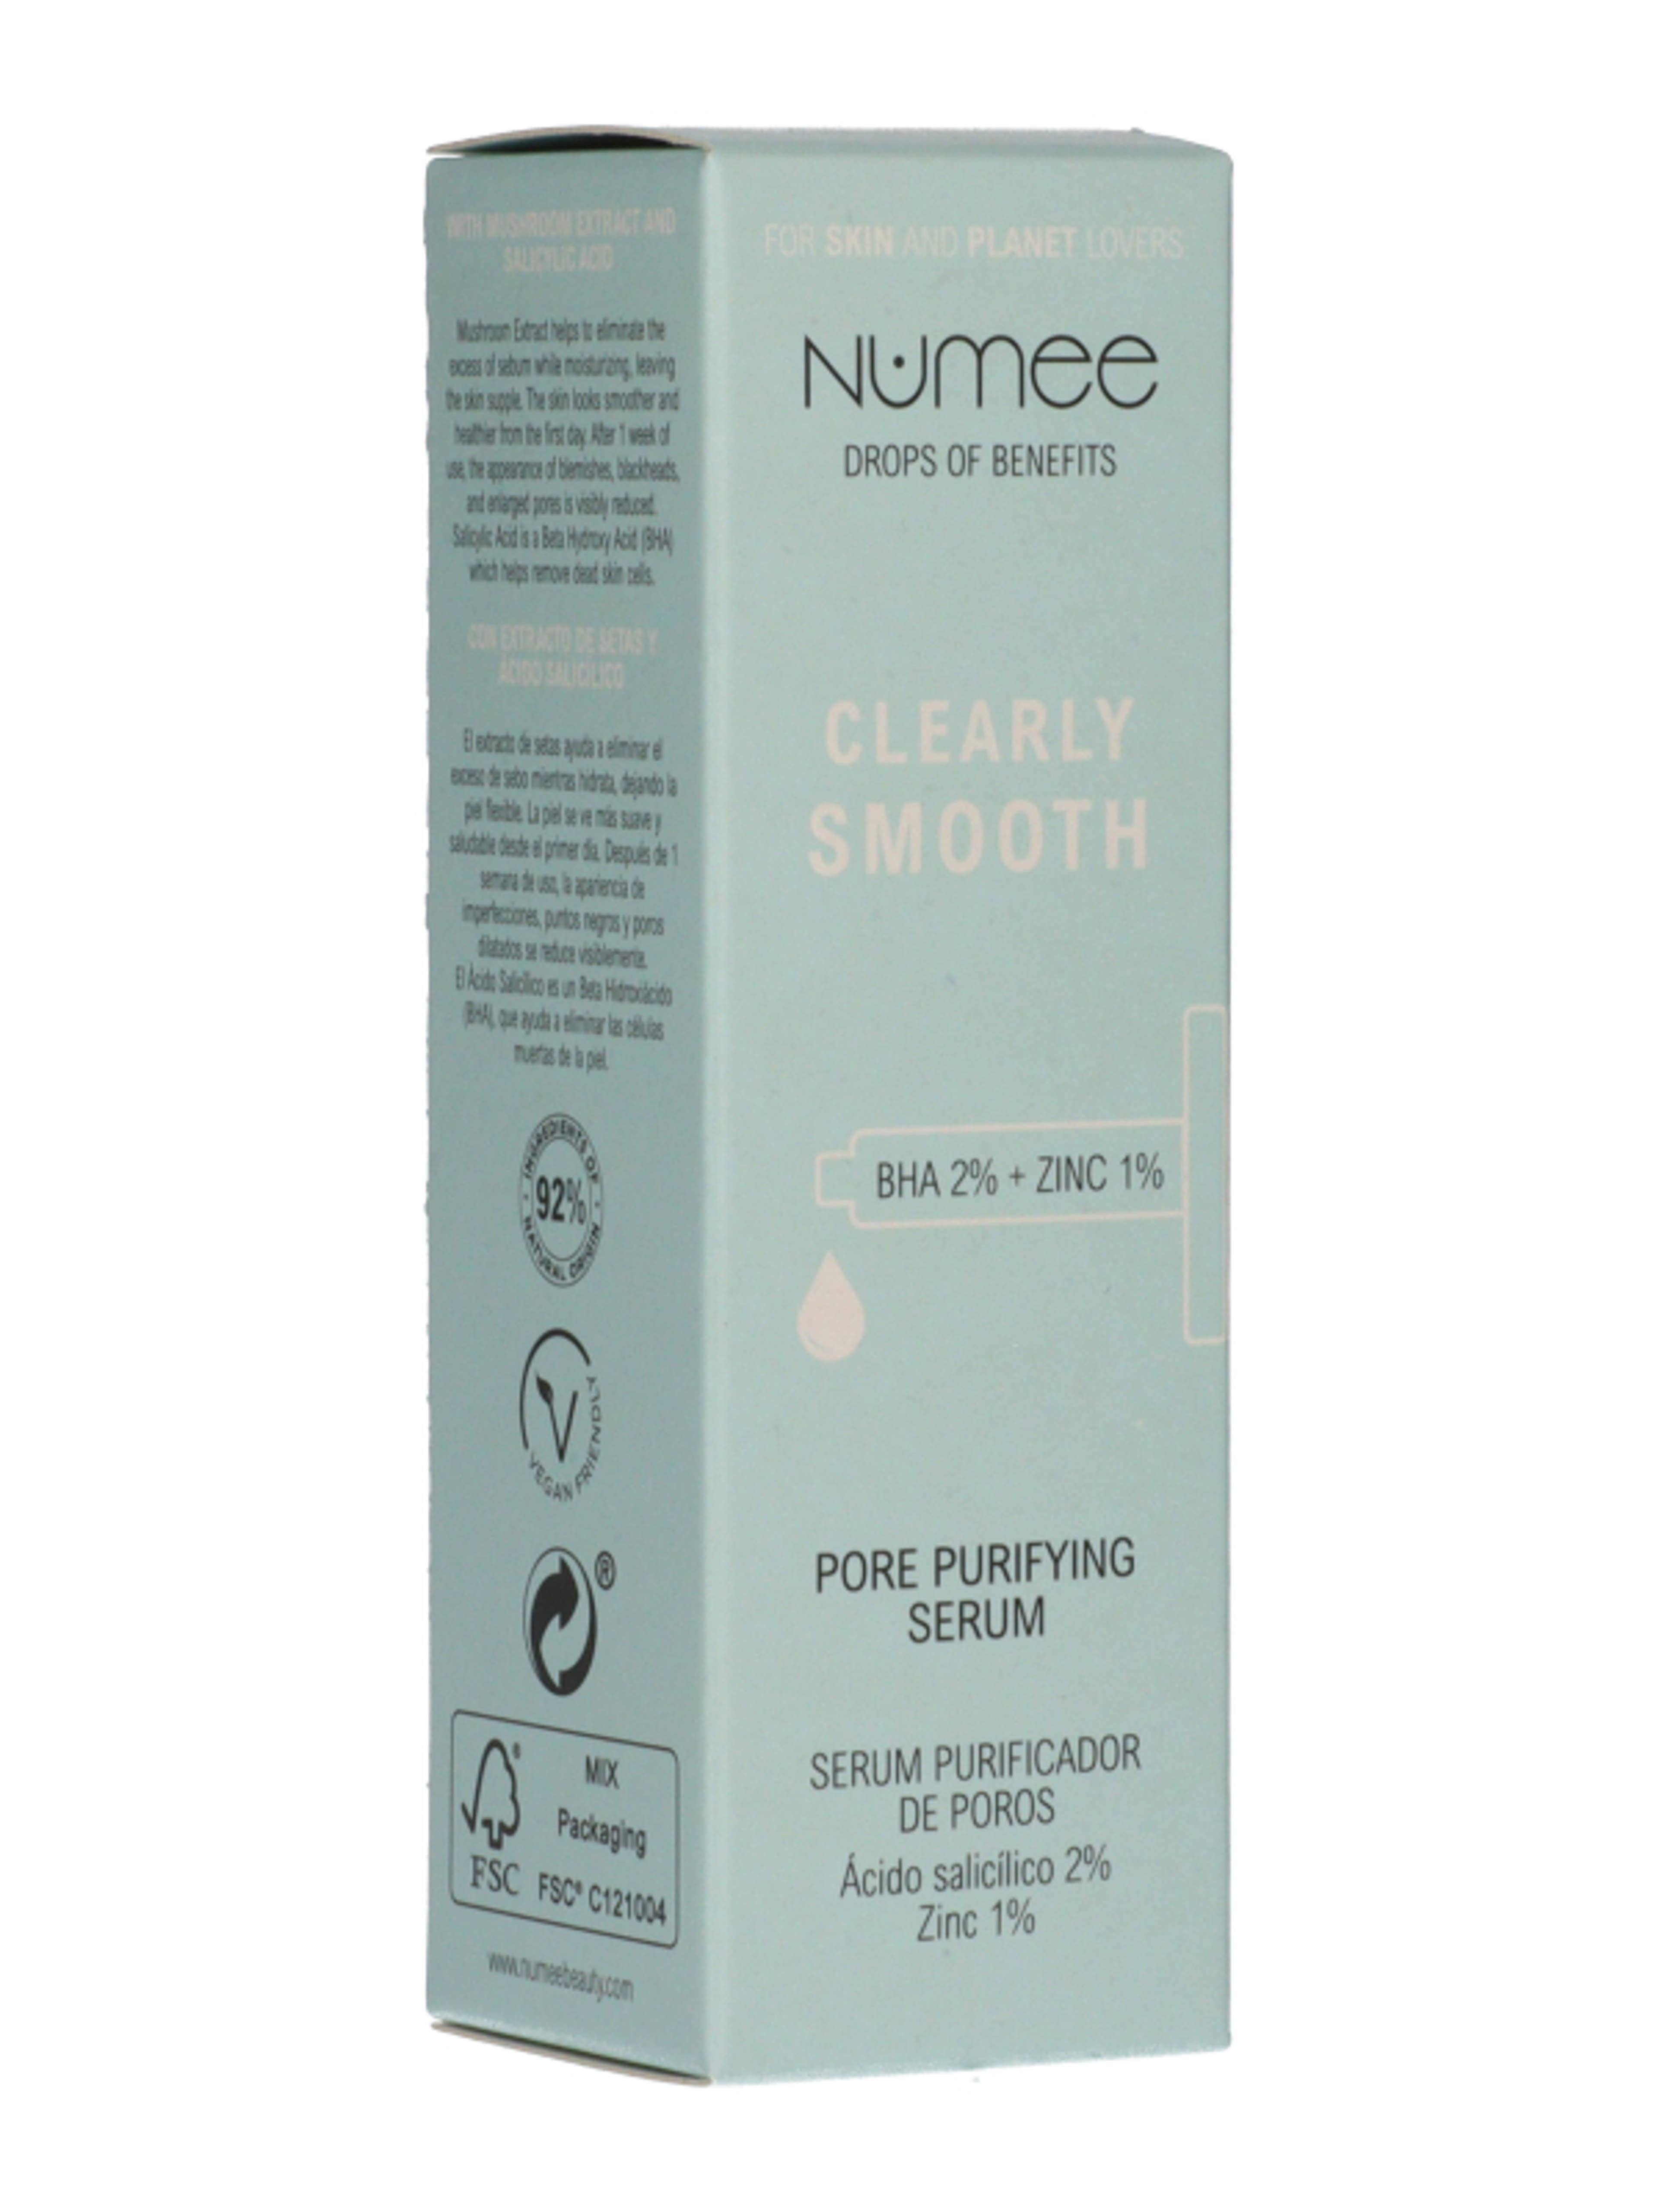 Numee Drops of Benefits Clearly Smooth Salicylic Acid szérum - 30 ml-5